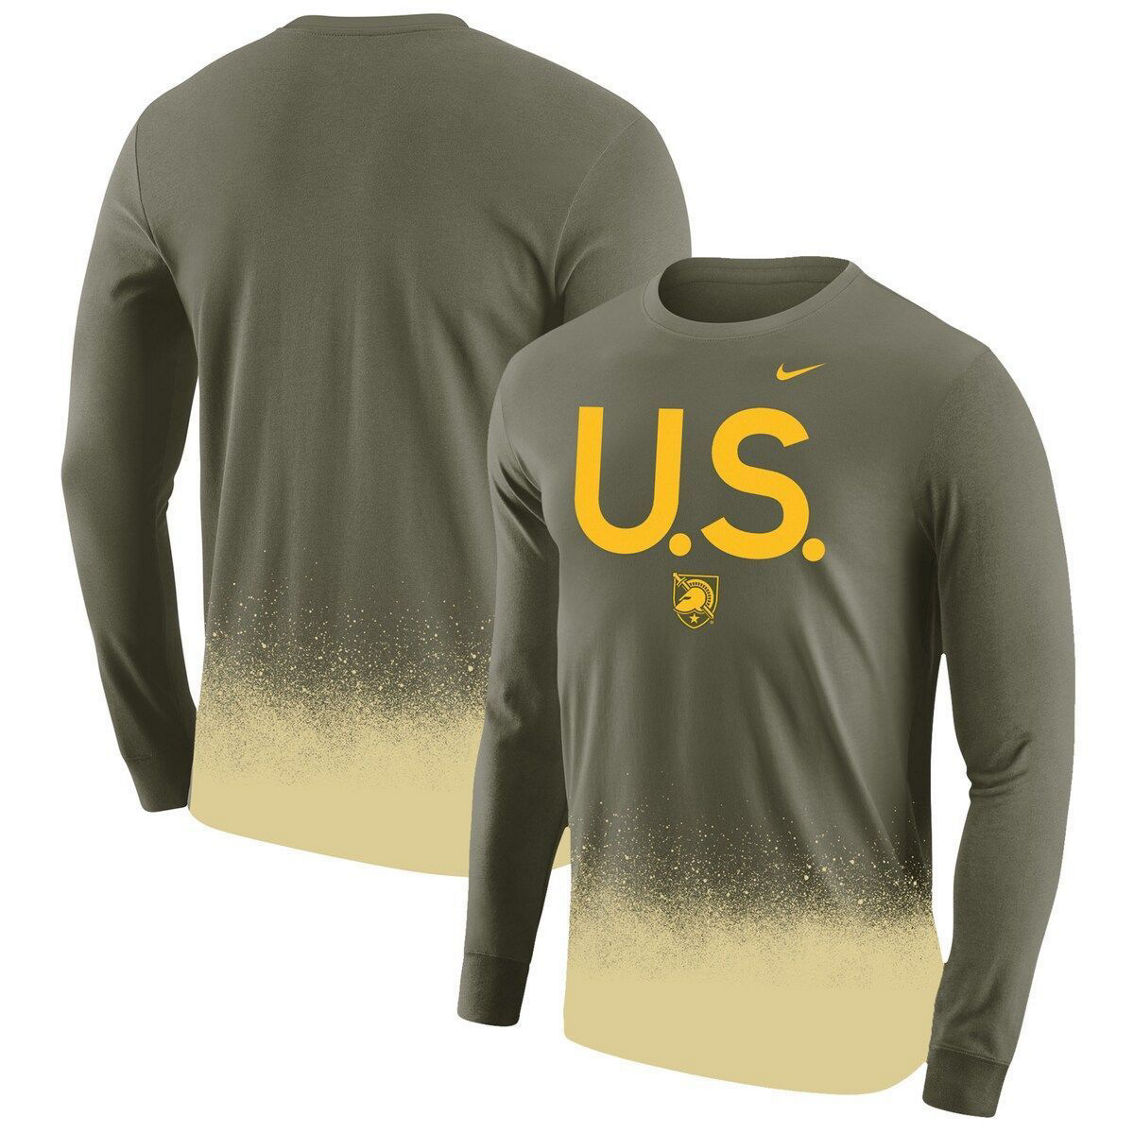 Nike Men's Olive Army Black Knights 1st Armored Division Old Ironsides Rivalry Splatter Long Sleeve T-Shirt - Image 2 of 4